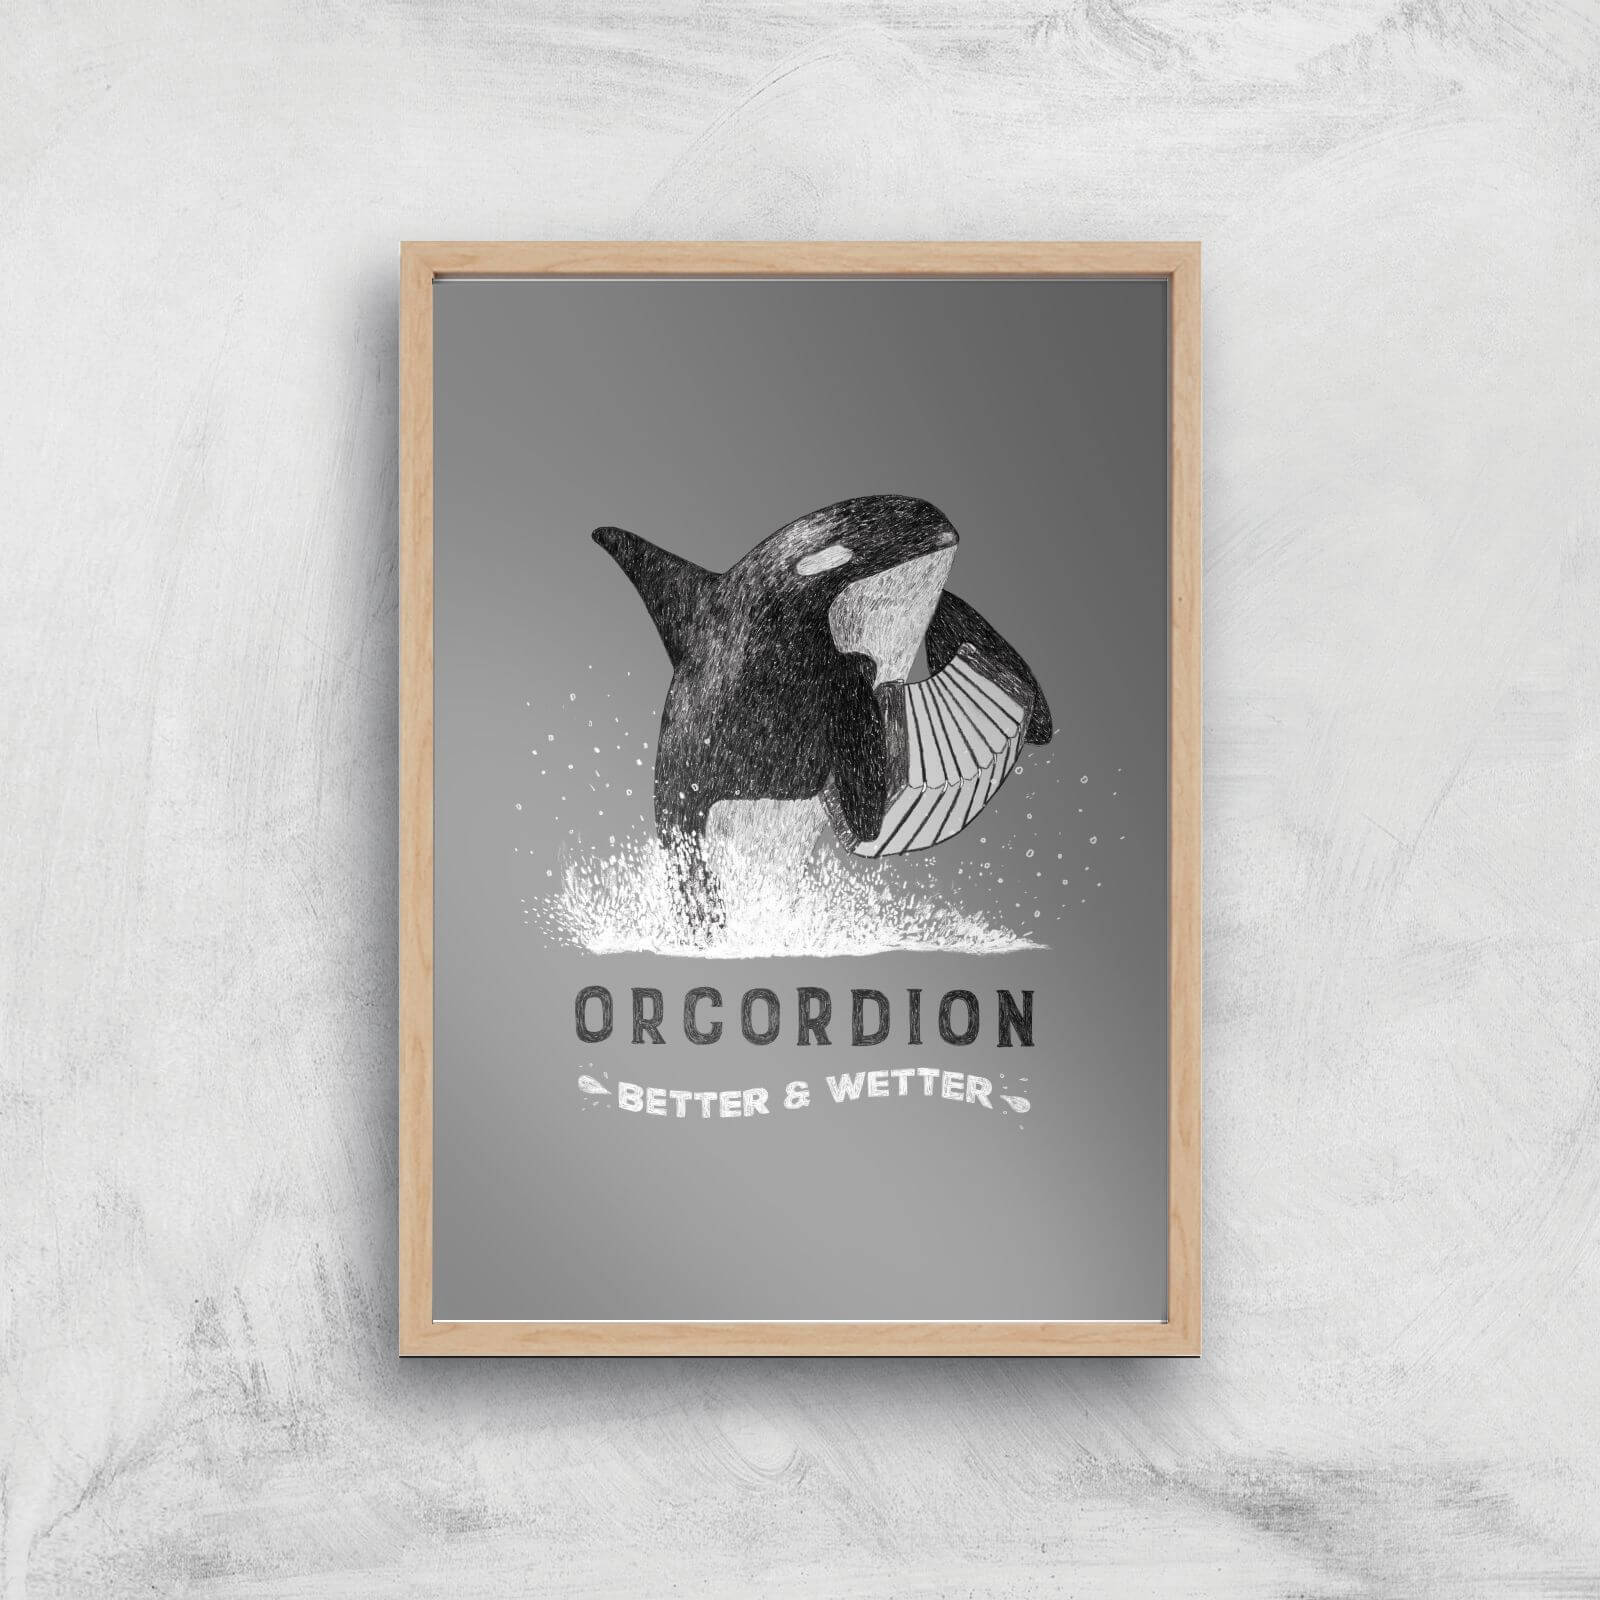 Orcordion Giclee Art Print - A2 - Wooden Frame